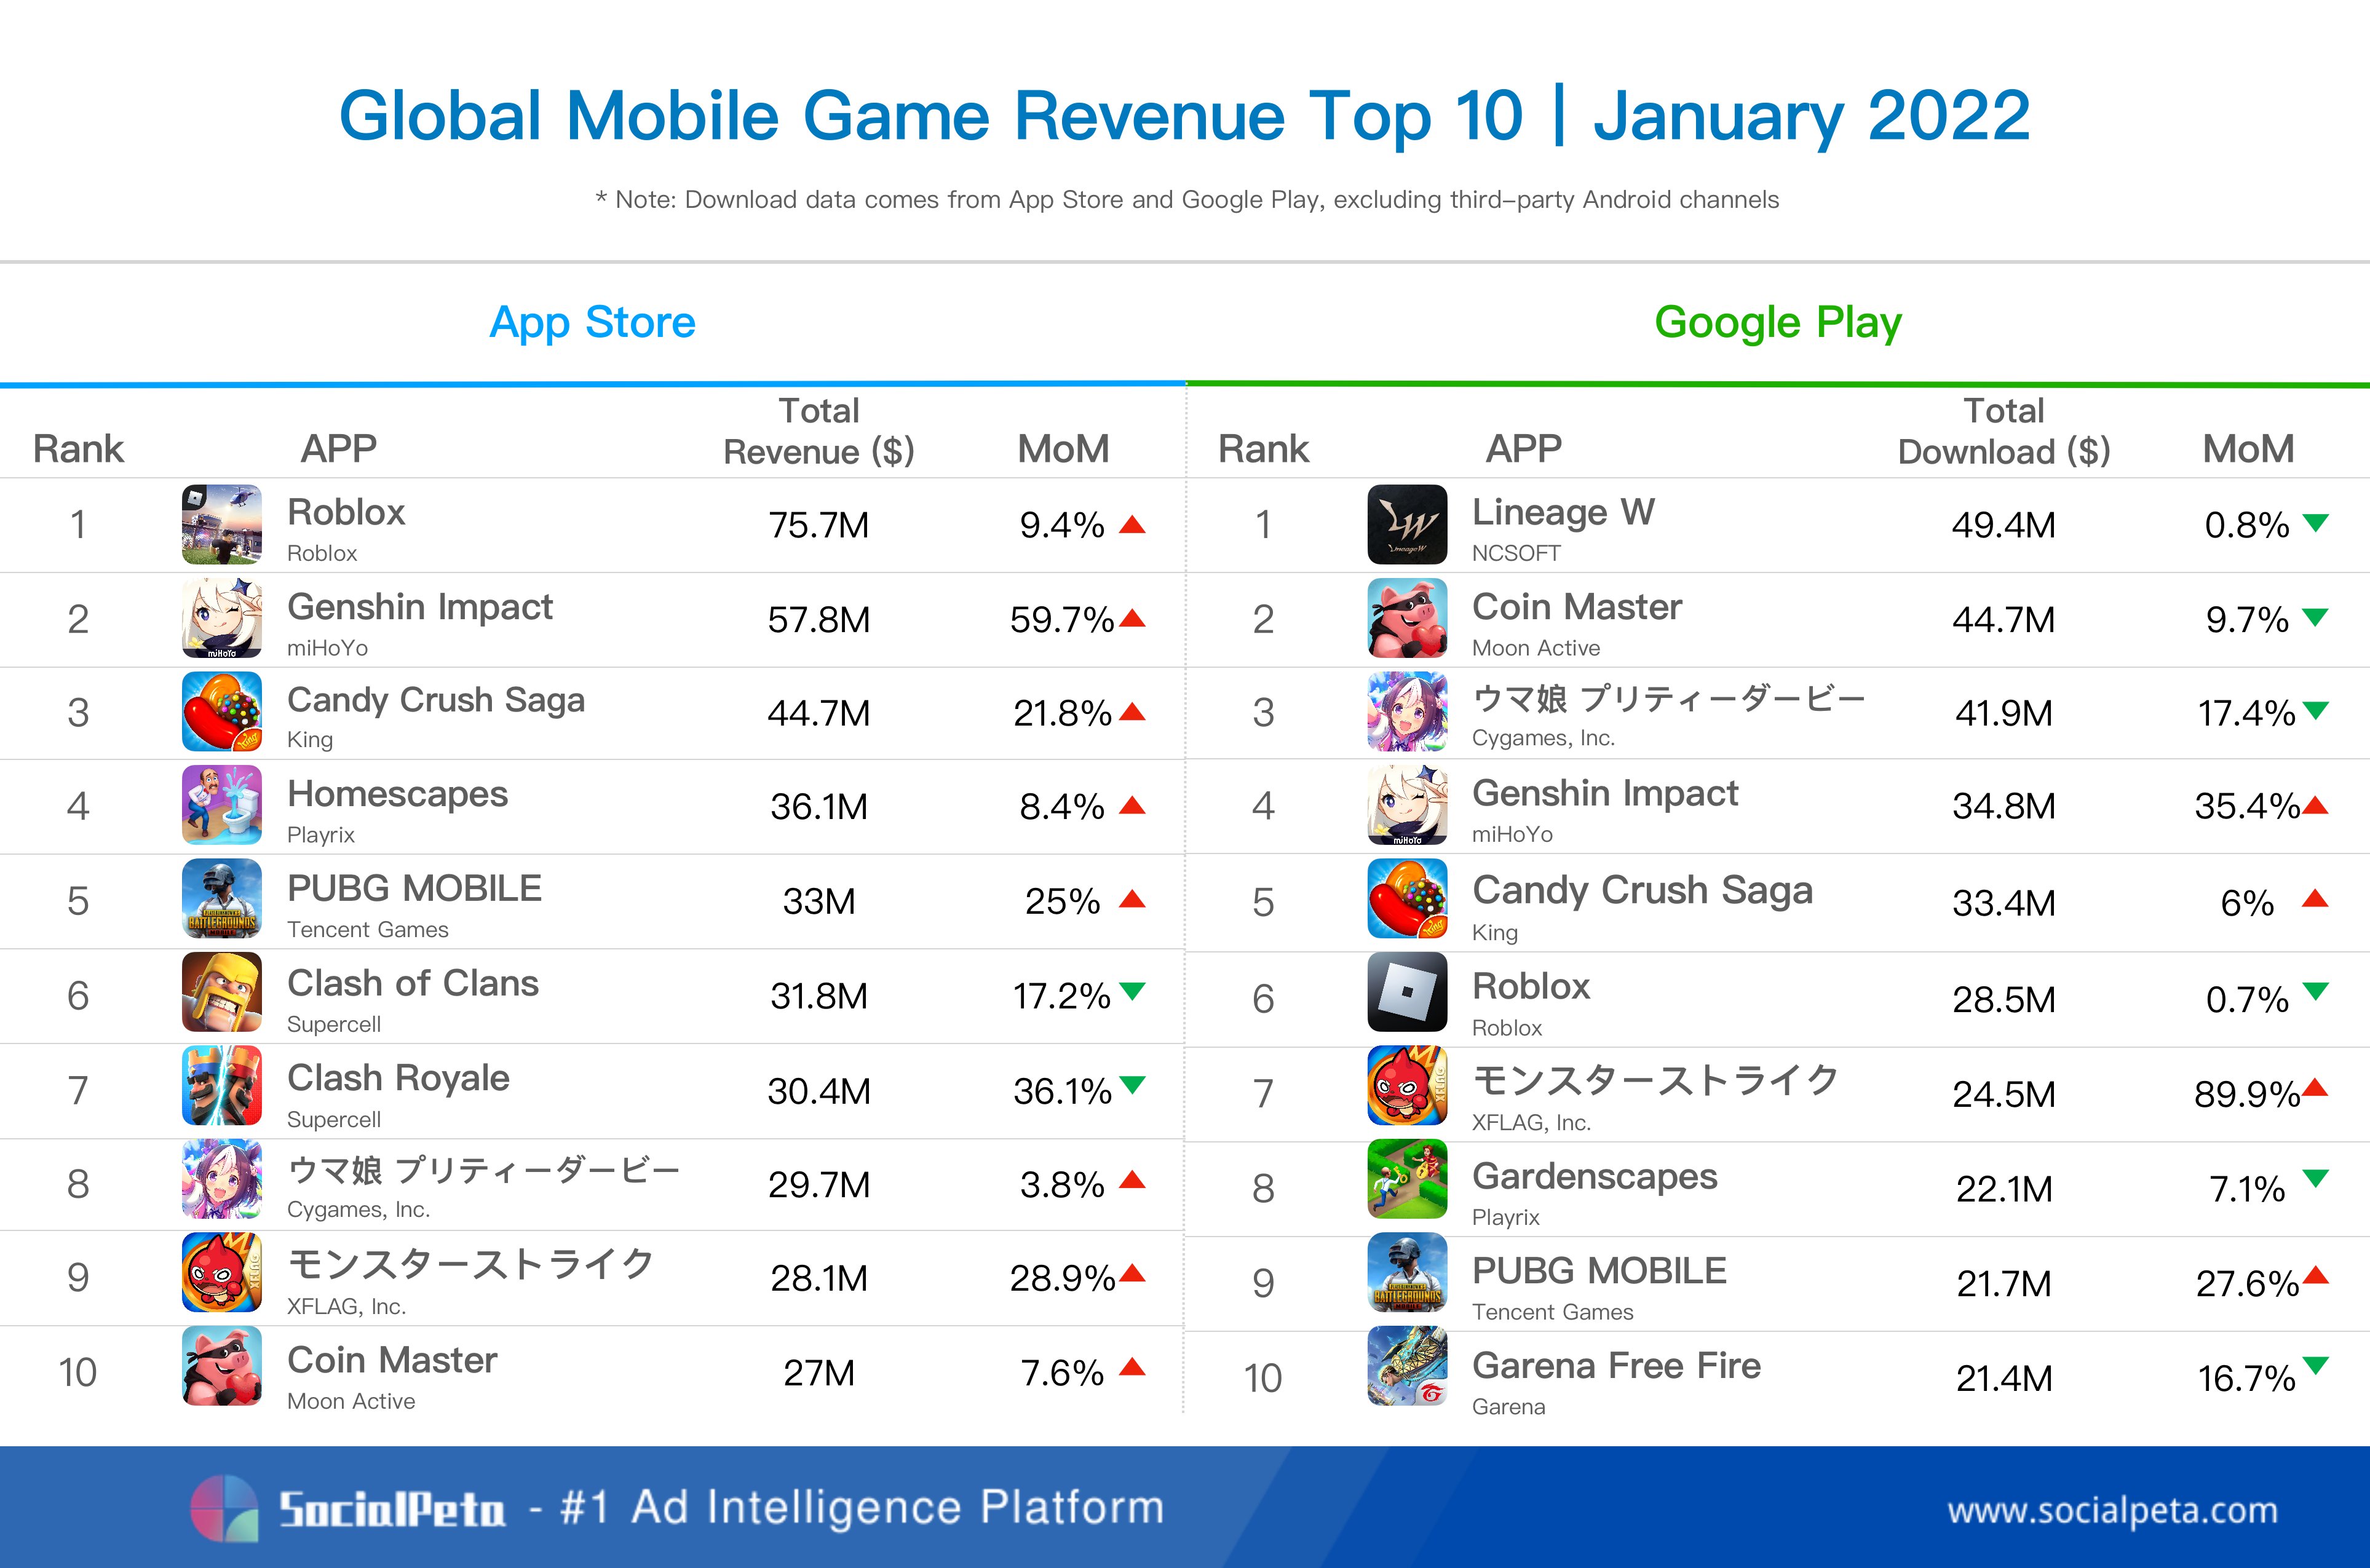 Most Popular Apps and Games in 2022